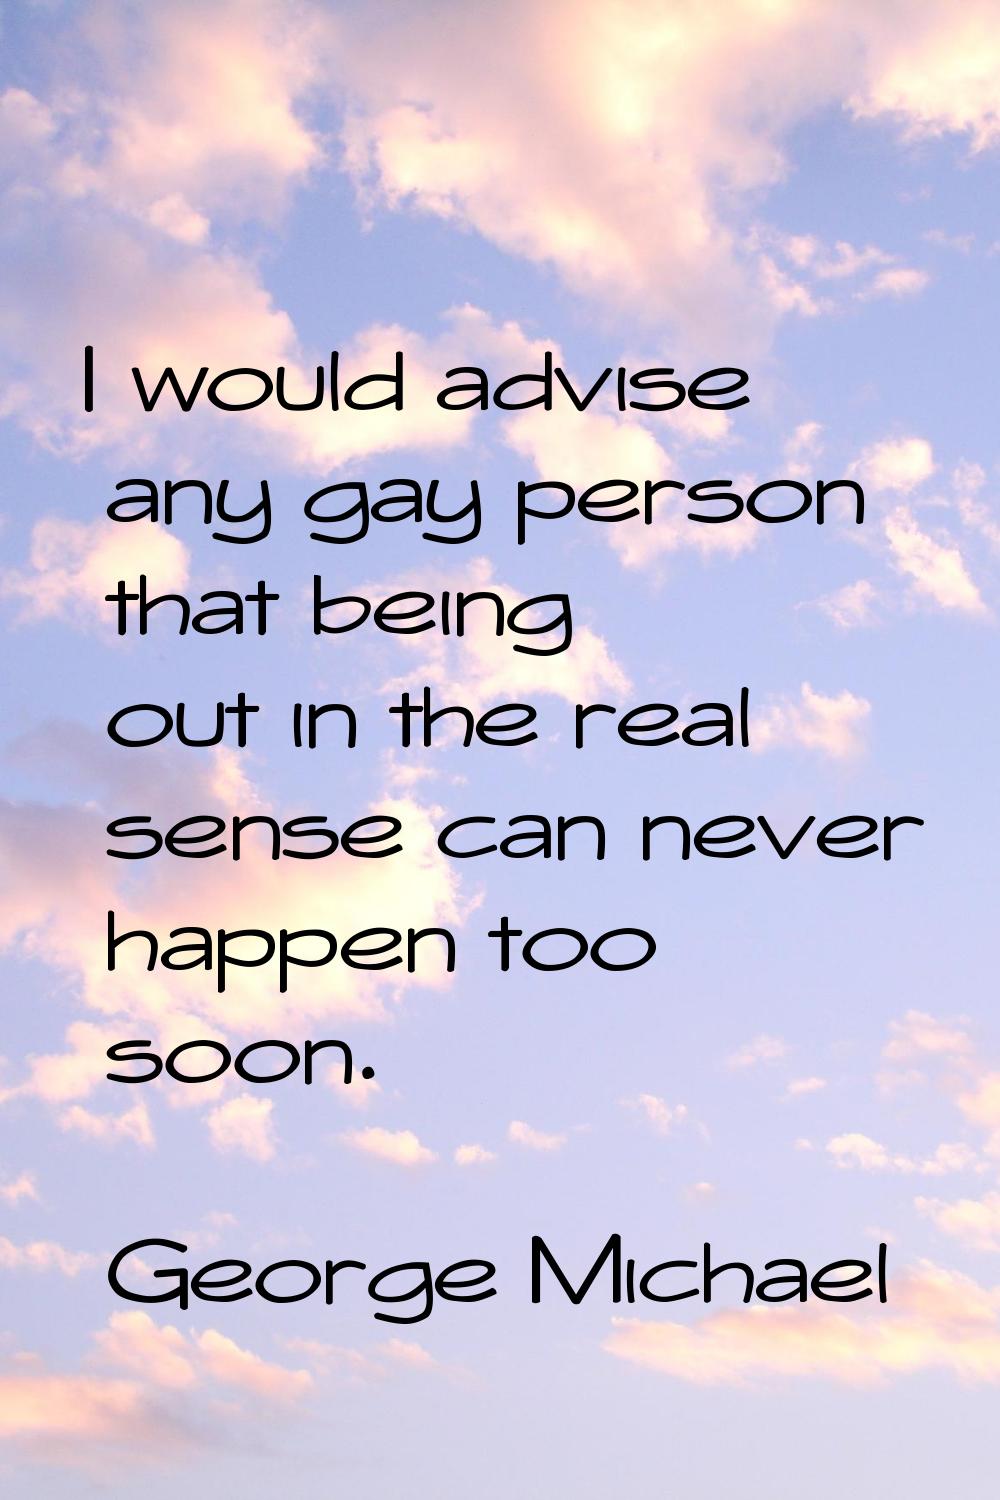 I would advise any gay person that being out in the real sense can never happen too soon.